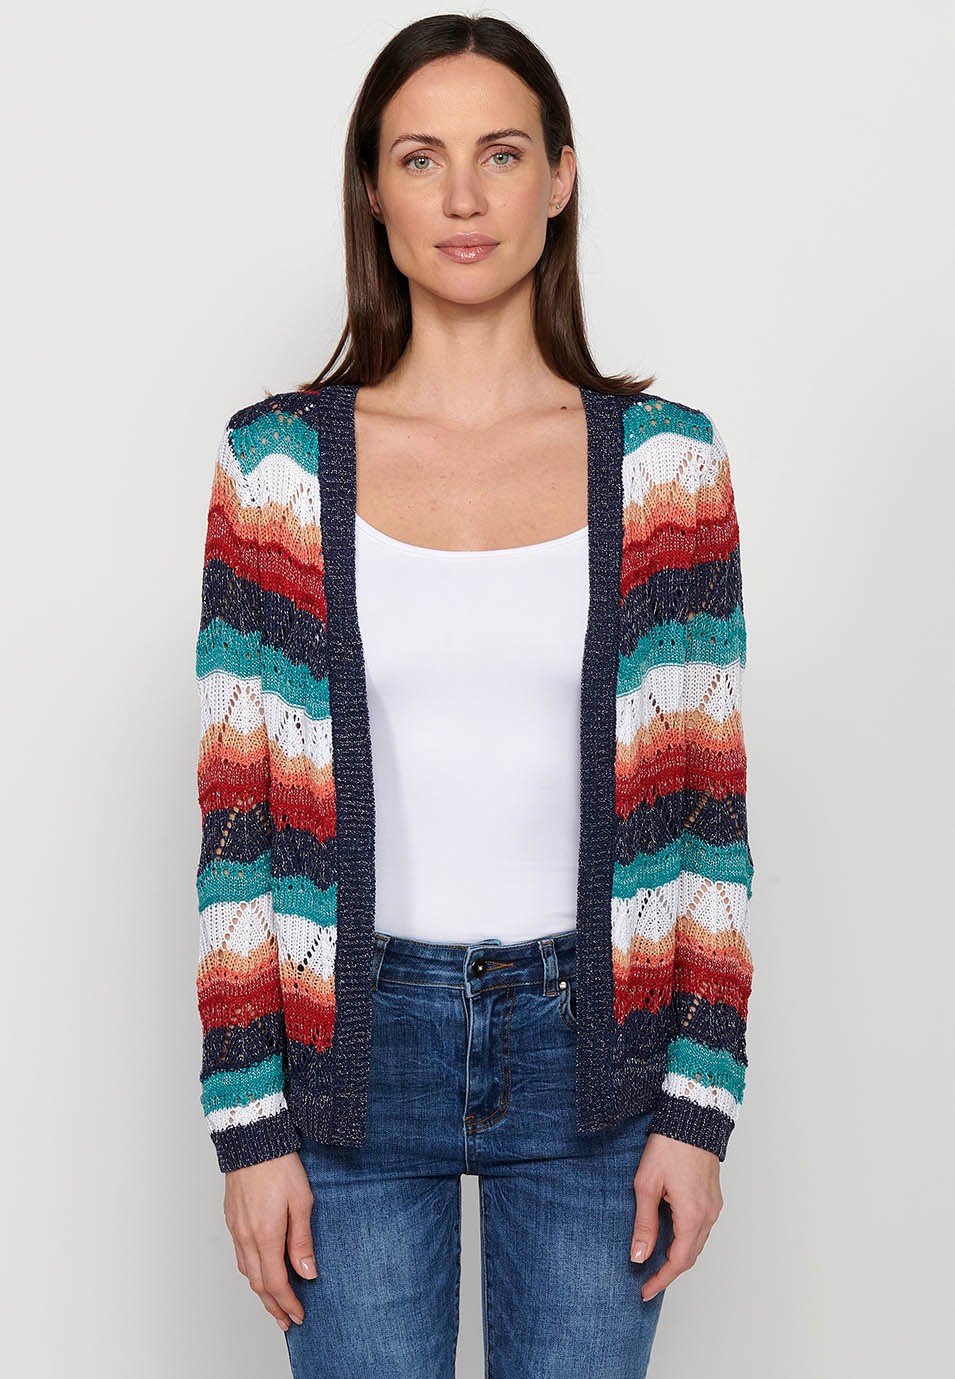 Long-sleeved openwork tricot, multicolored stripes for women